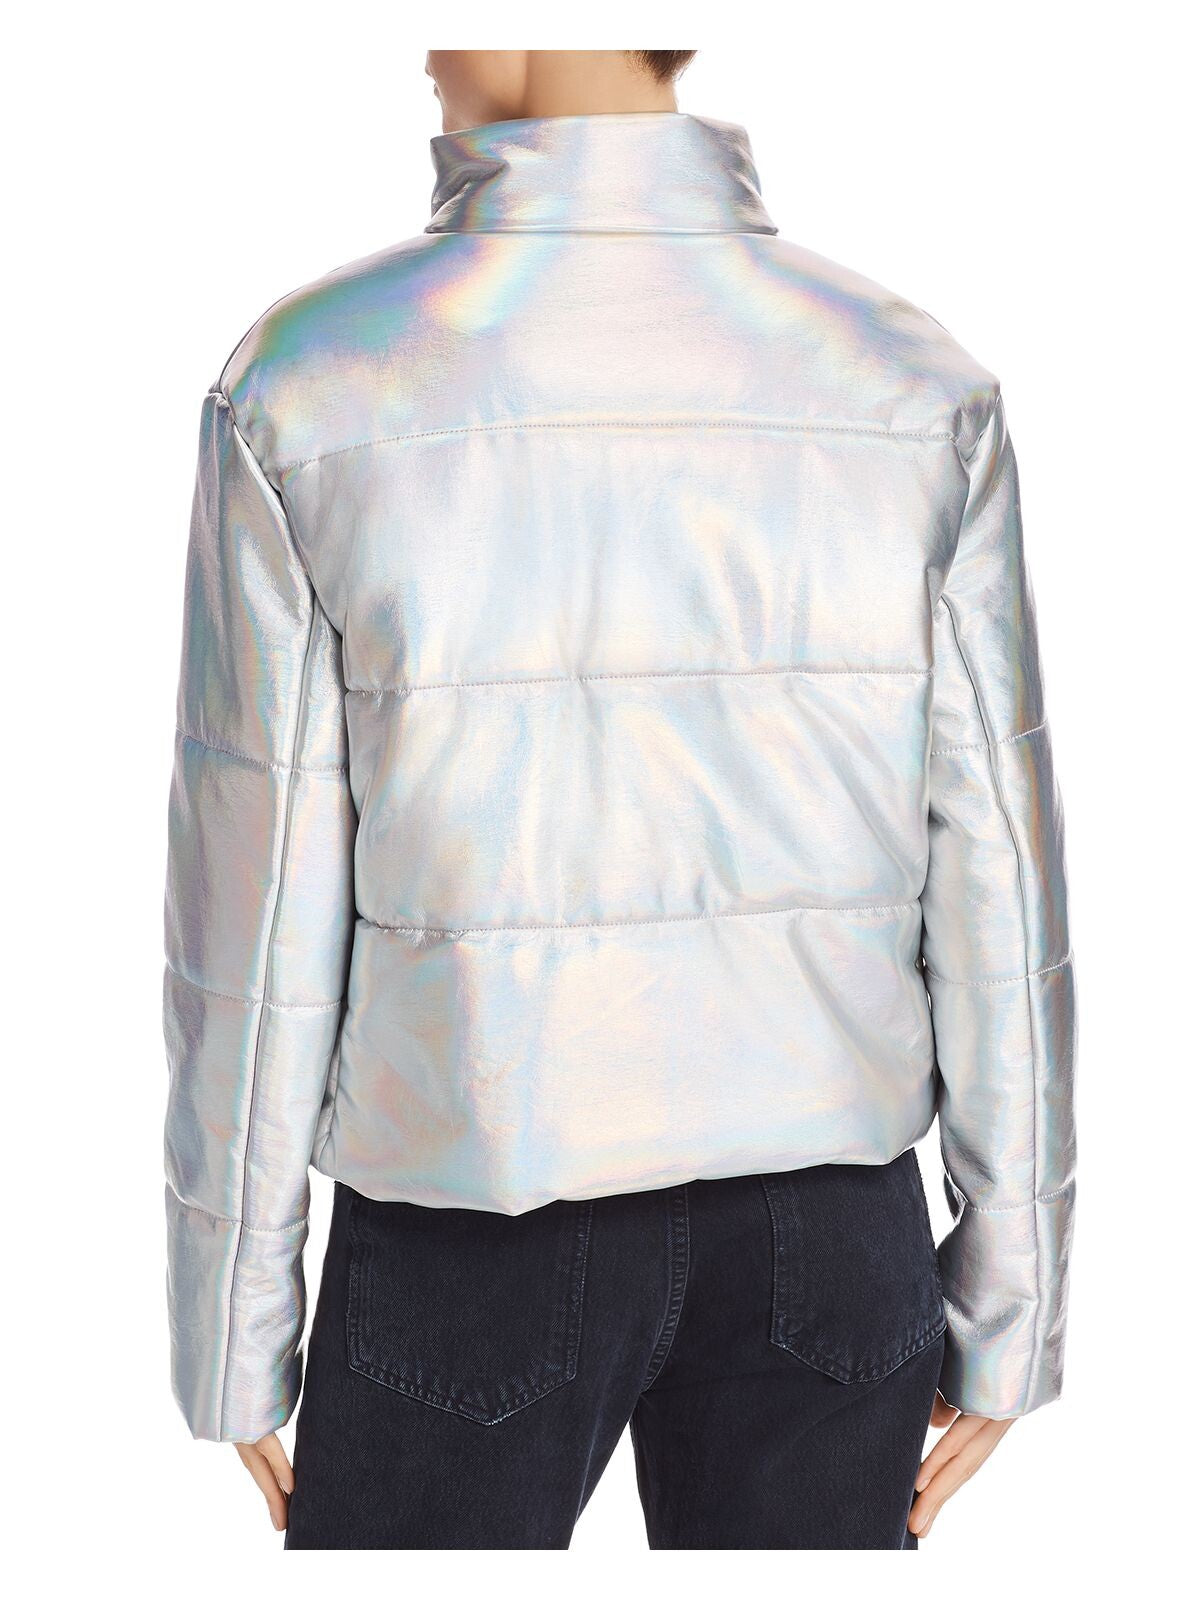 VEDA Womens Silver High Neck Puffer Jacket Size: M